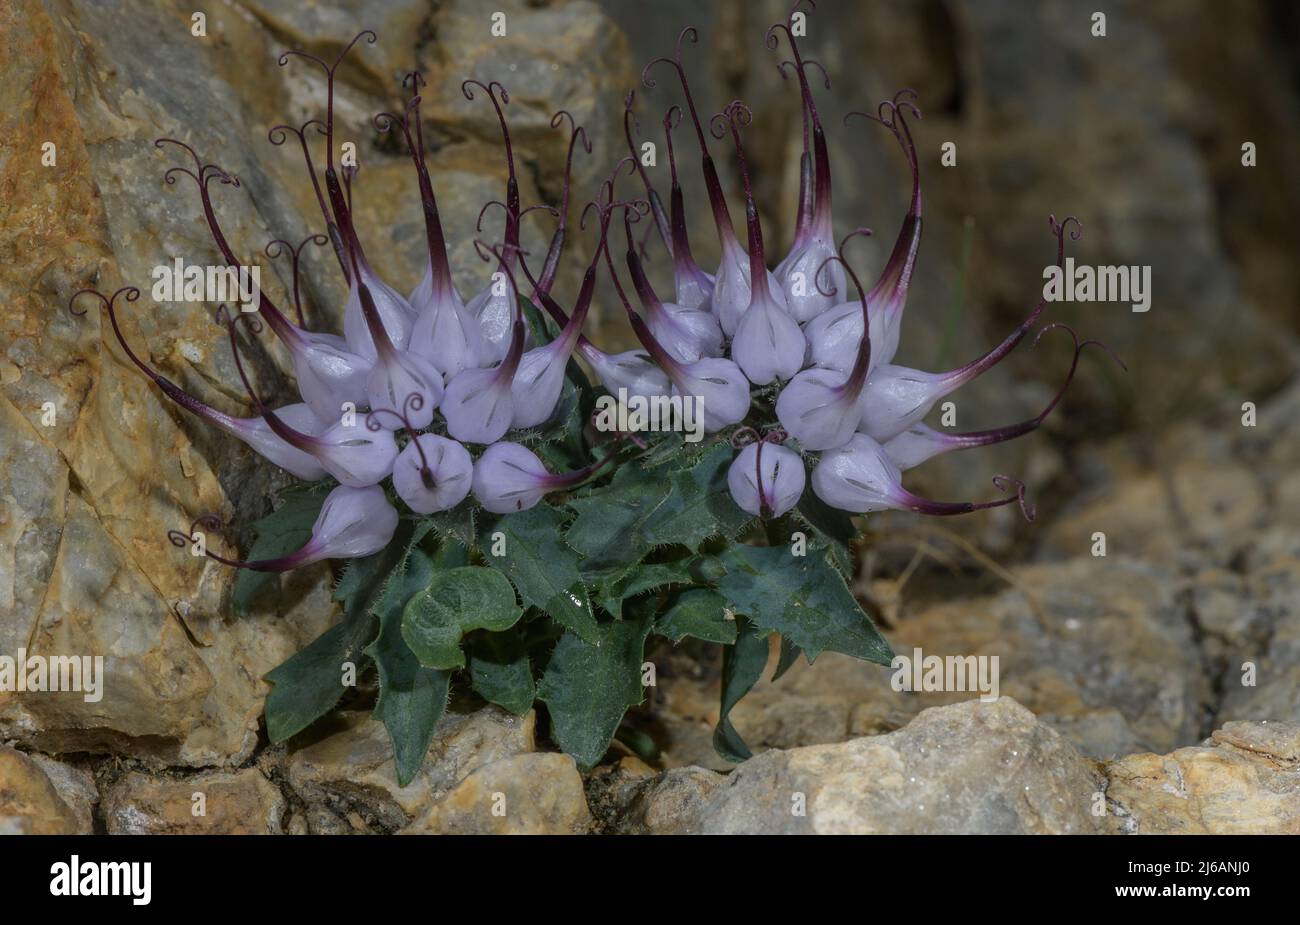 Devil's Claw, Physoplexis comosa in flower in rock-crevice, in the Dolomites. Italy. Stock Photo